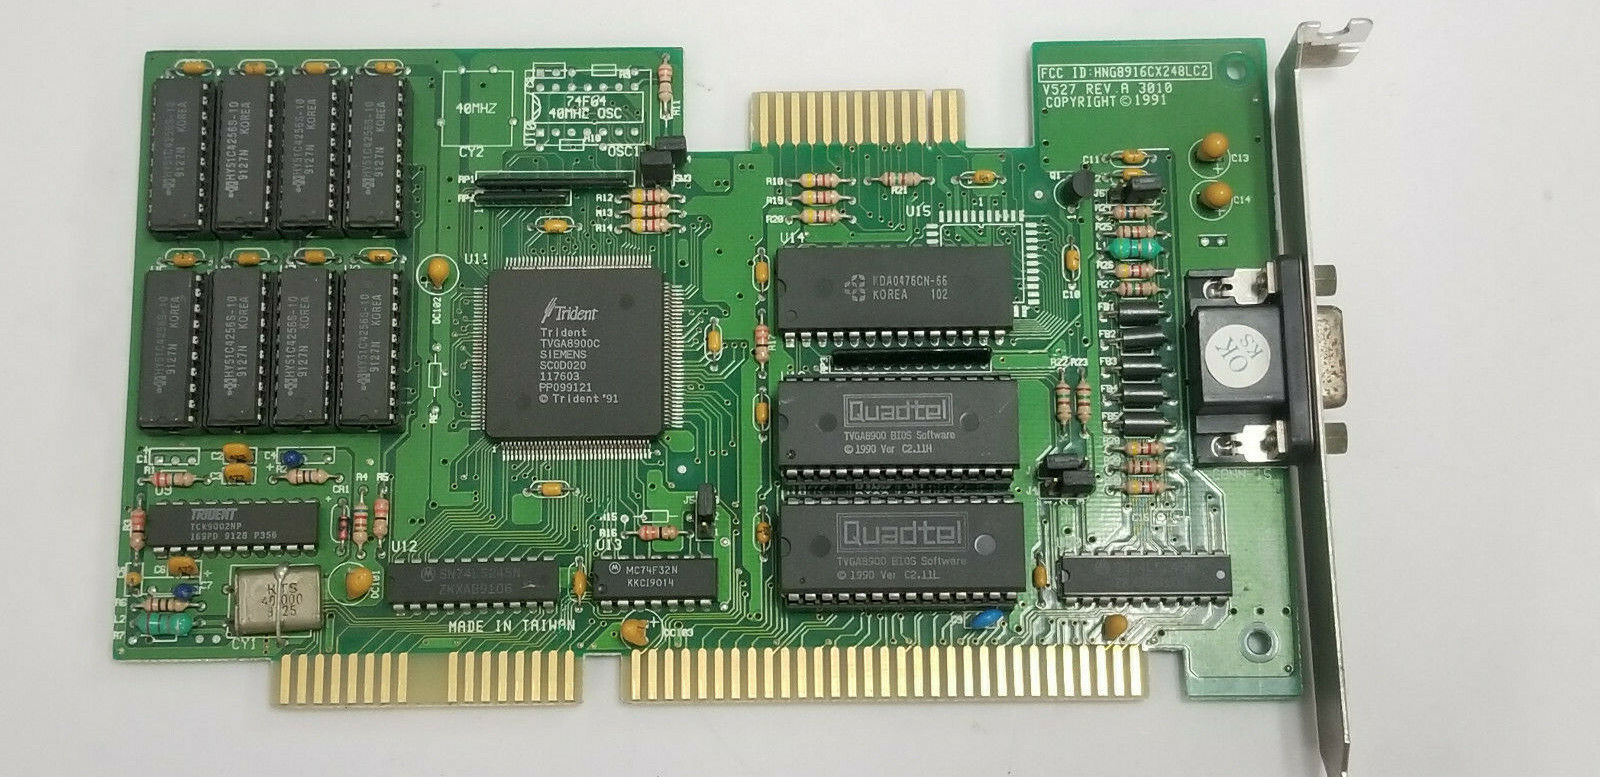 Trident 8900C ISA 16 1MB VGA Video Card for DOS Retro Gaming used working #Y2B